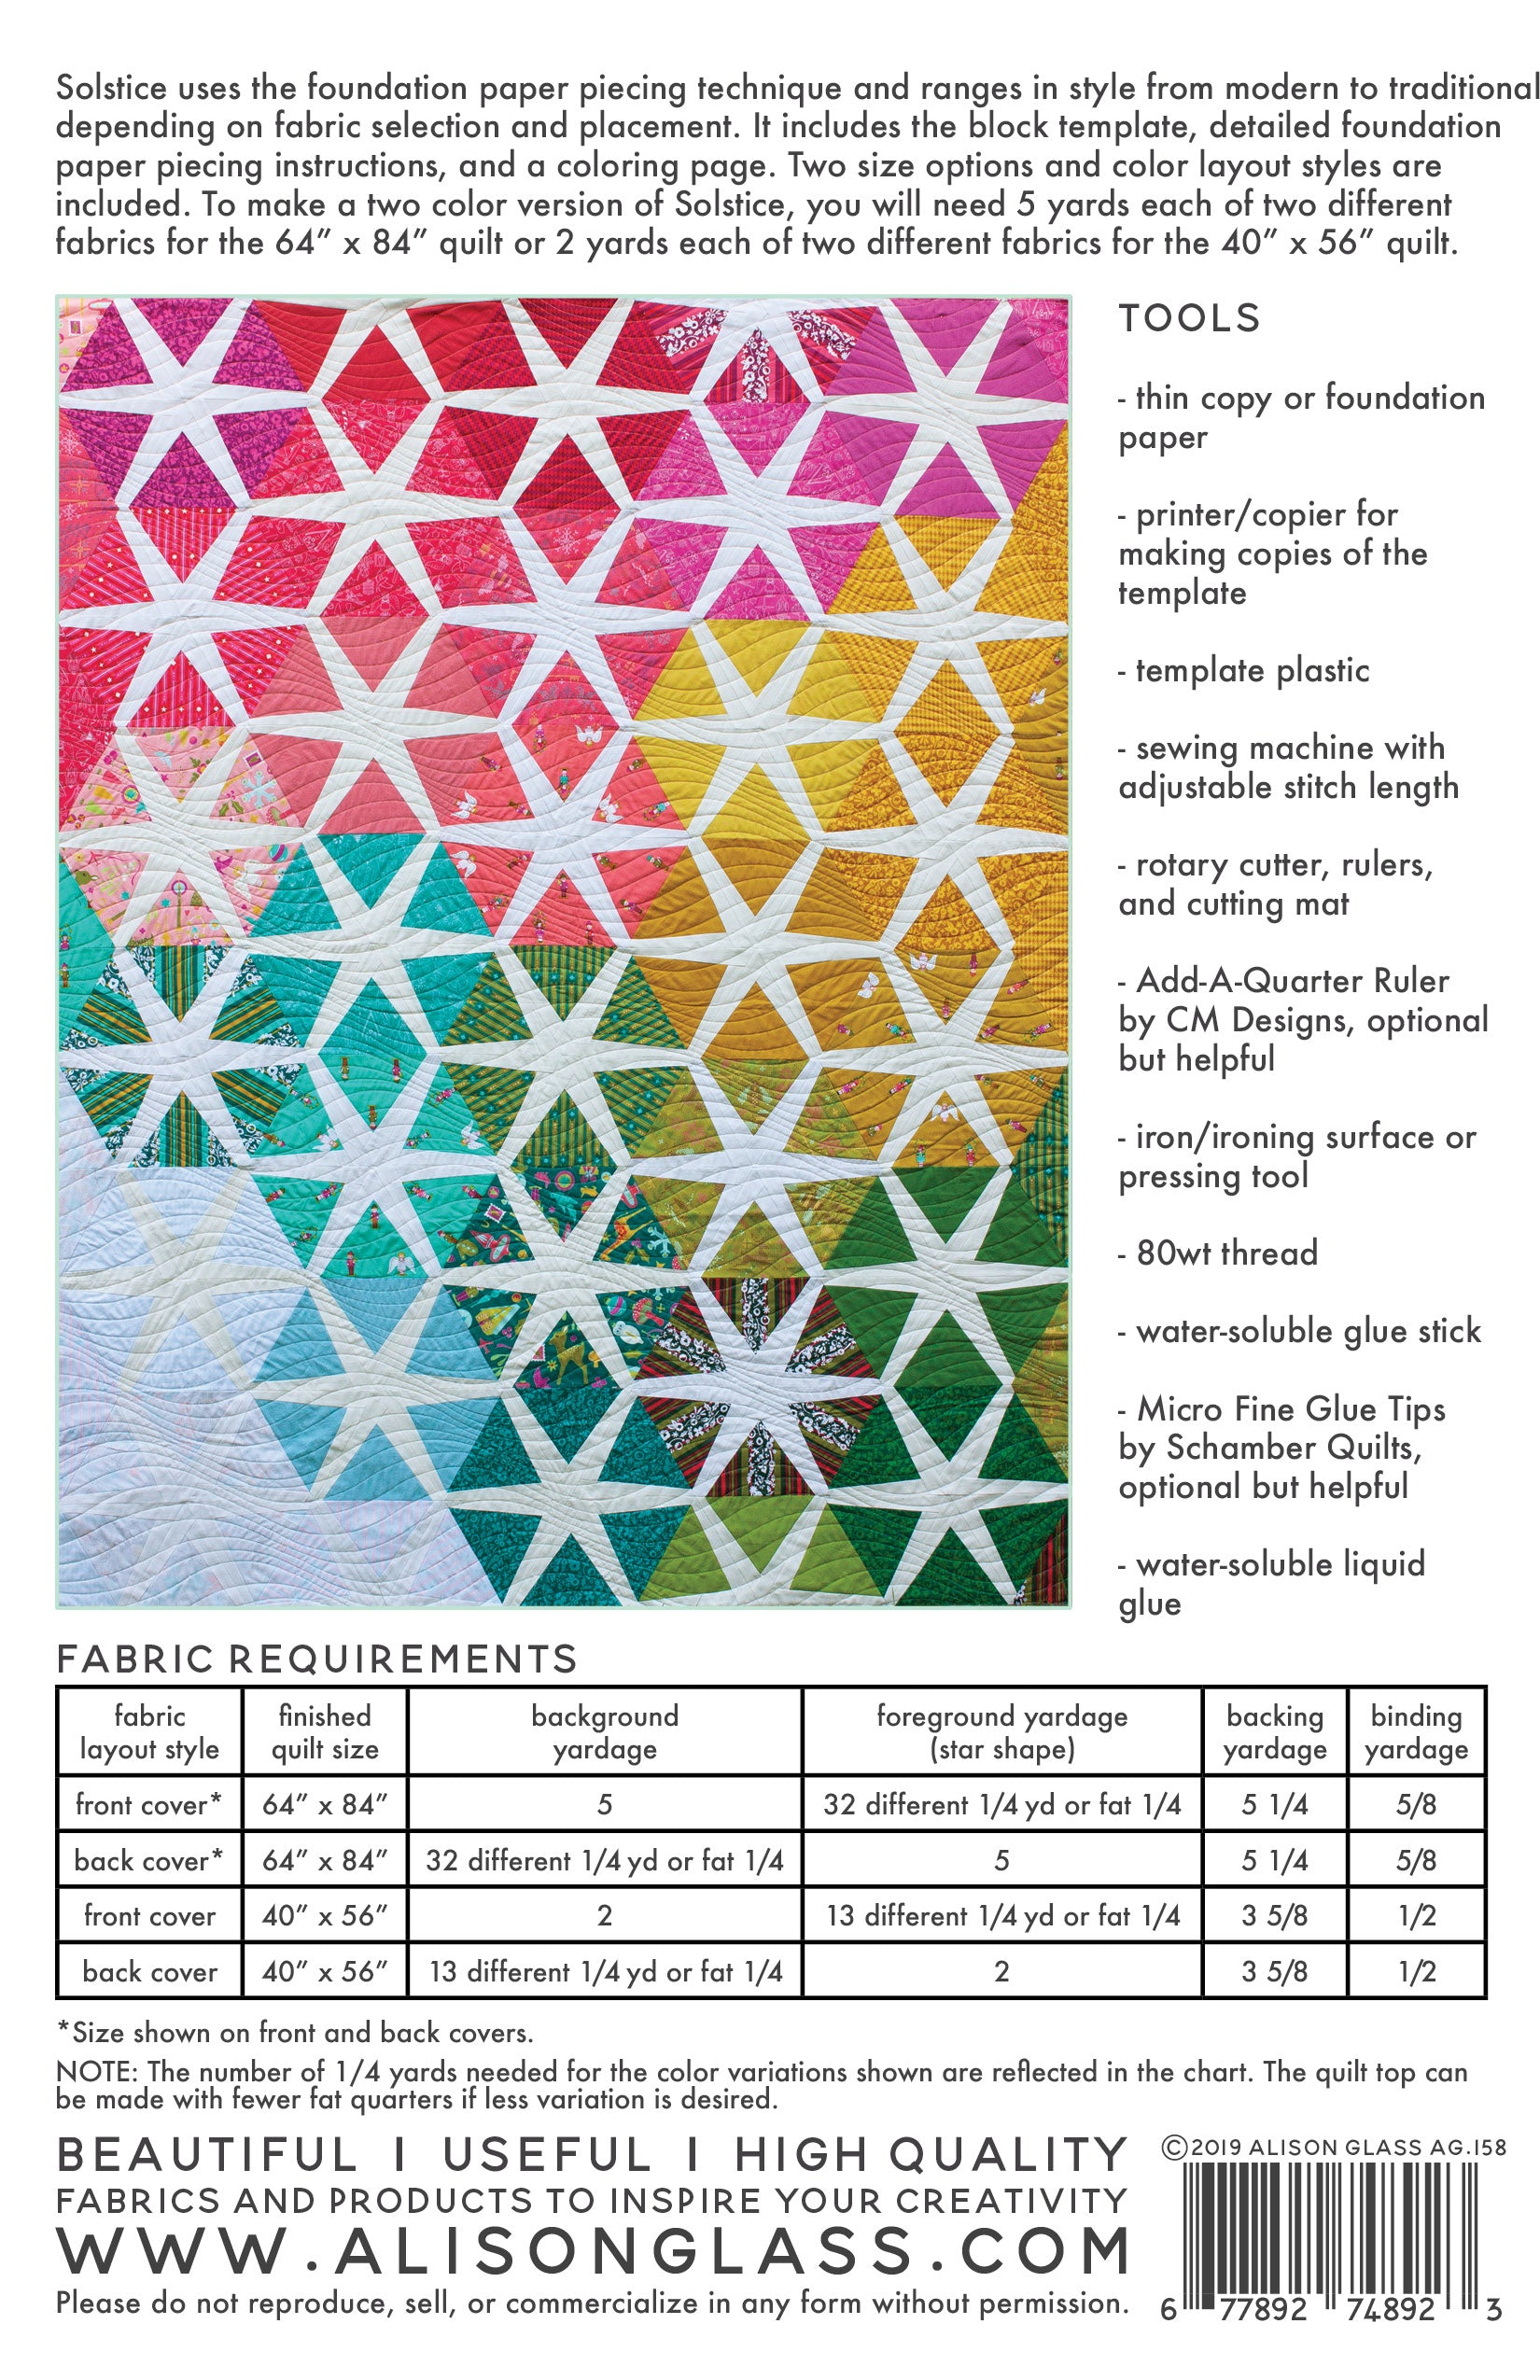 Solstice Quilt Pattern by Alison Glass